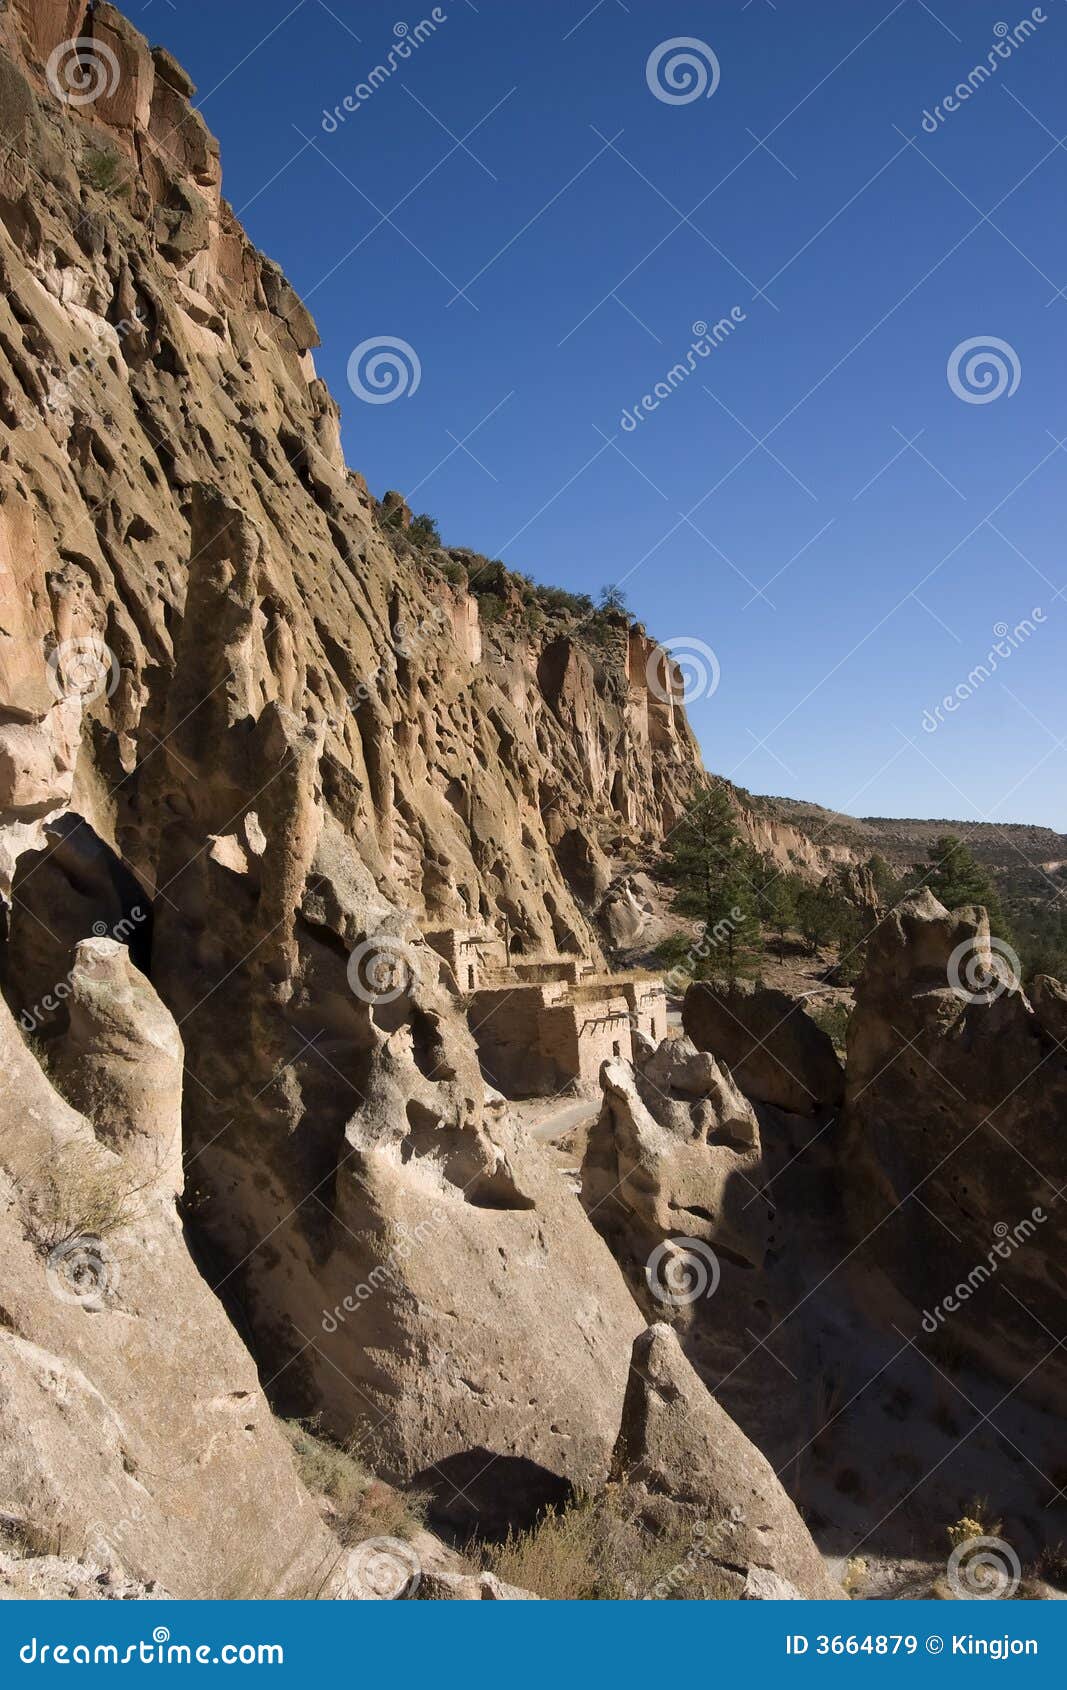 cliff dwellings at bandrlier new mexico